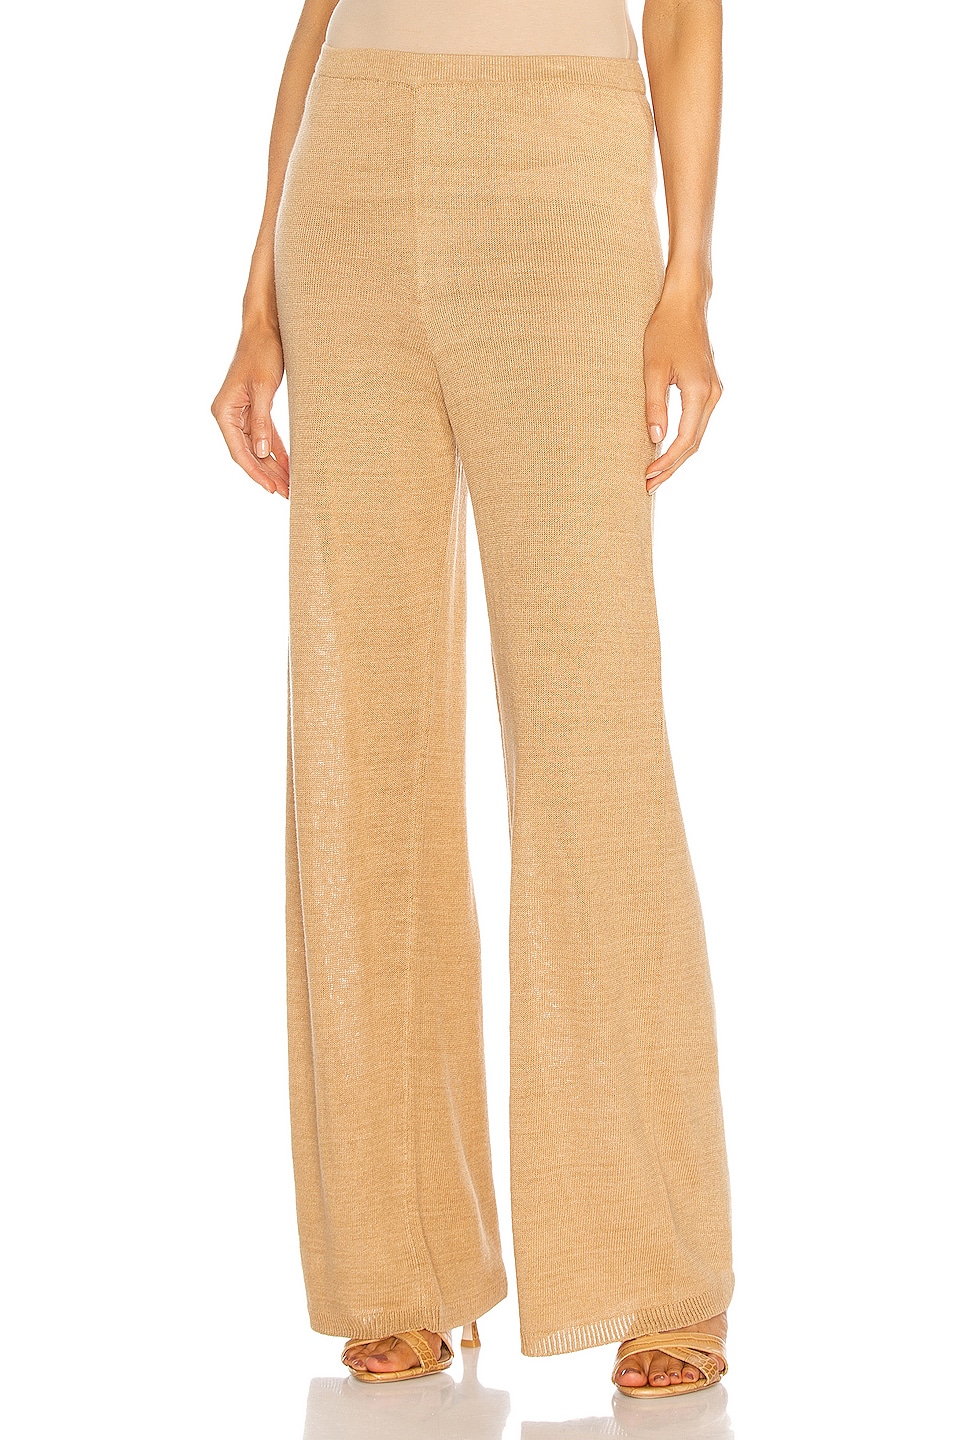 Image 1 of Cult Gaia Shauna Knit Pant in Light Camel